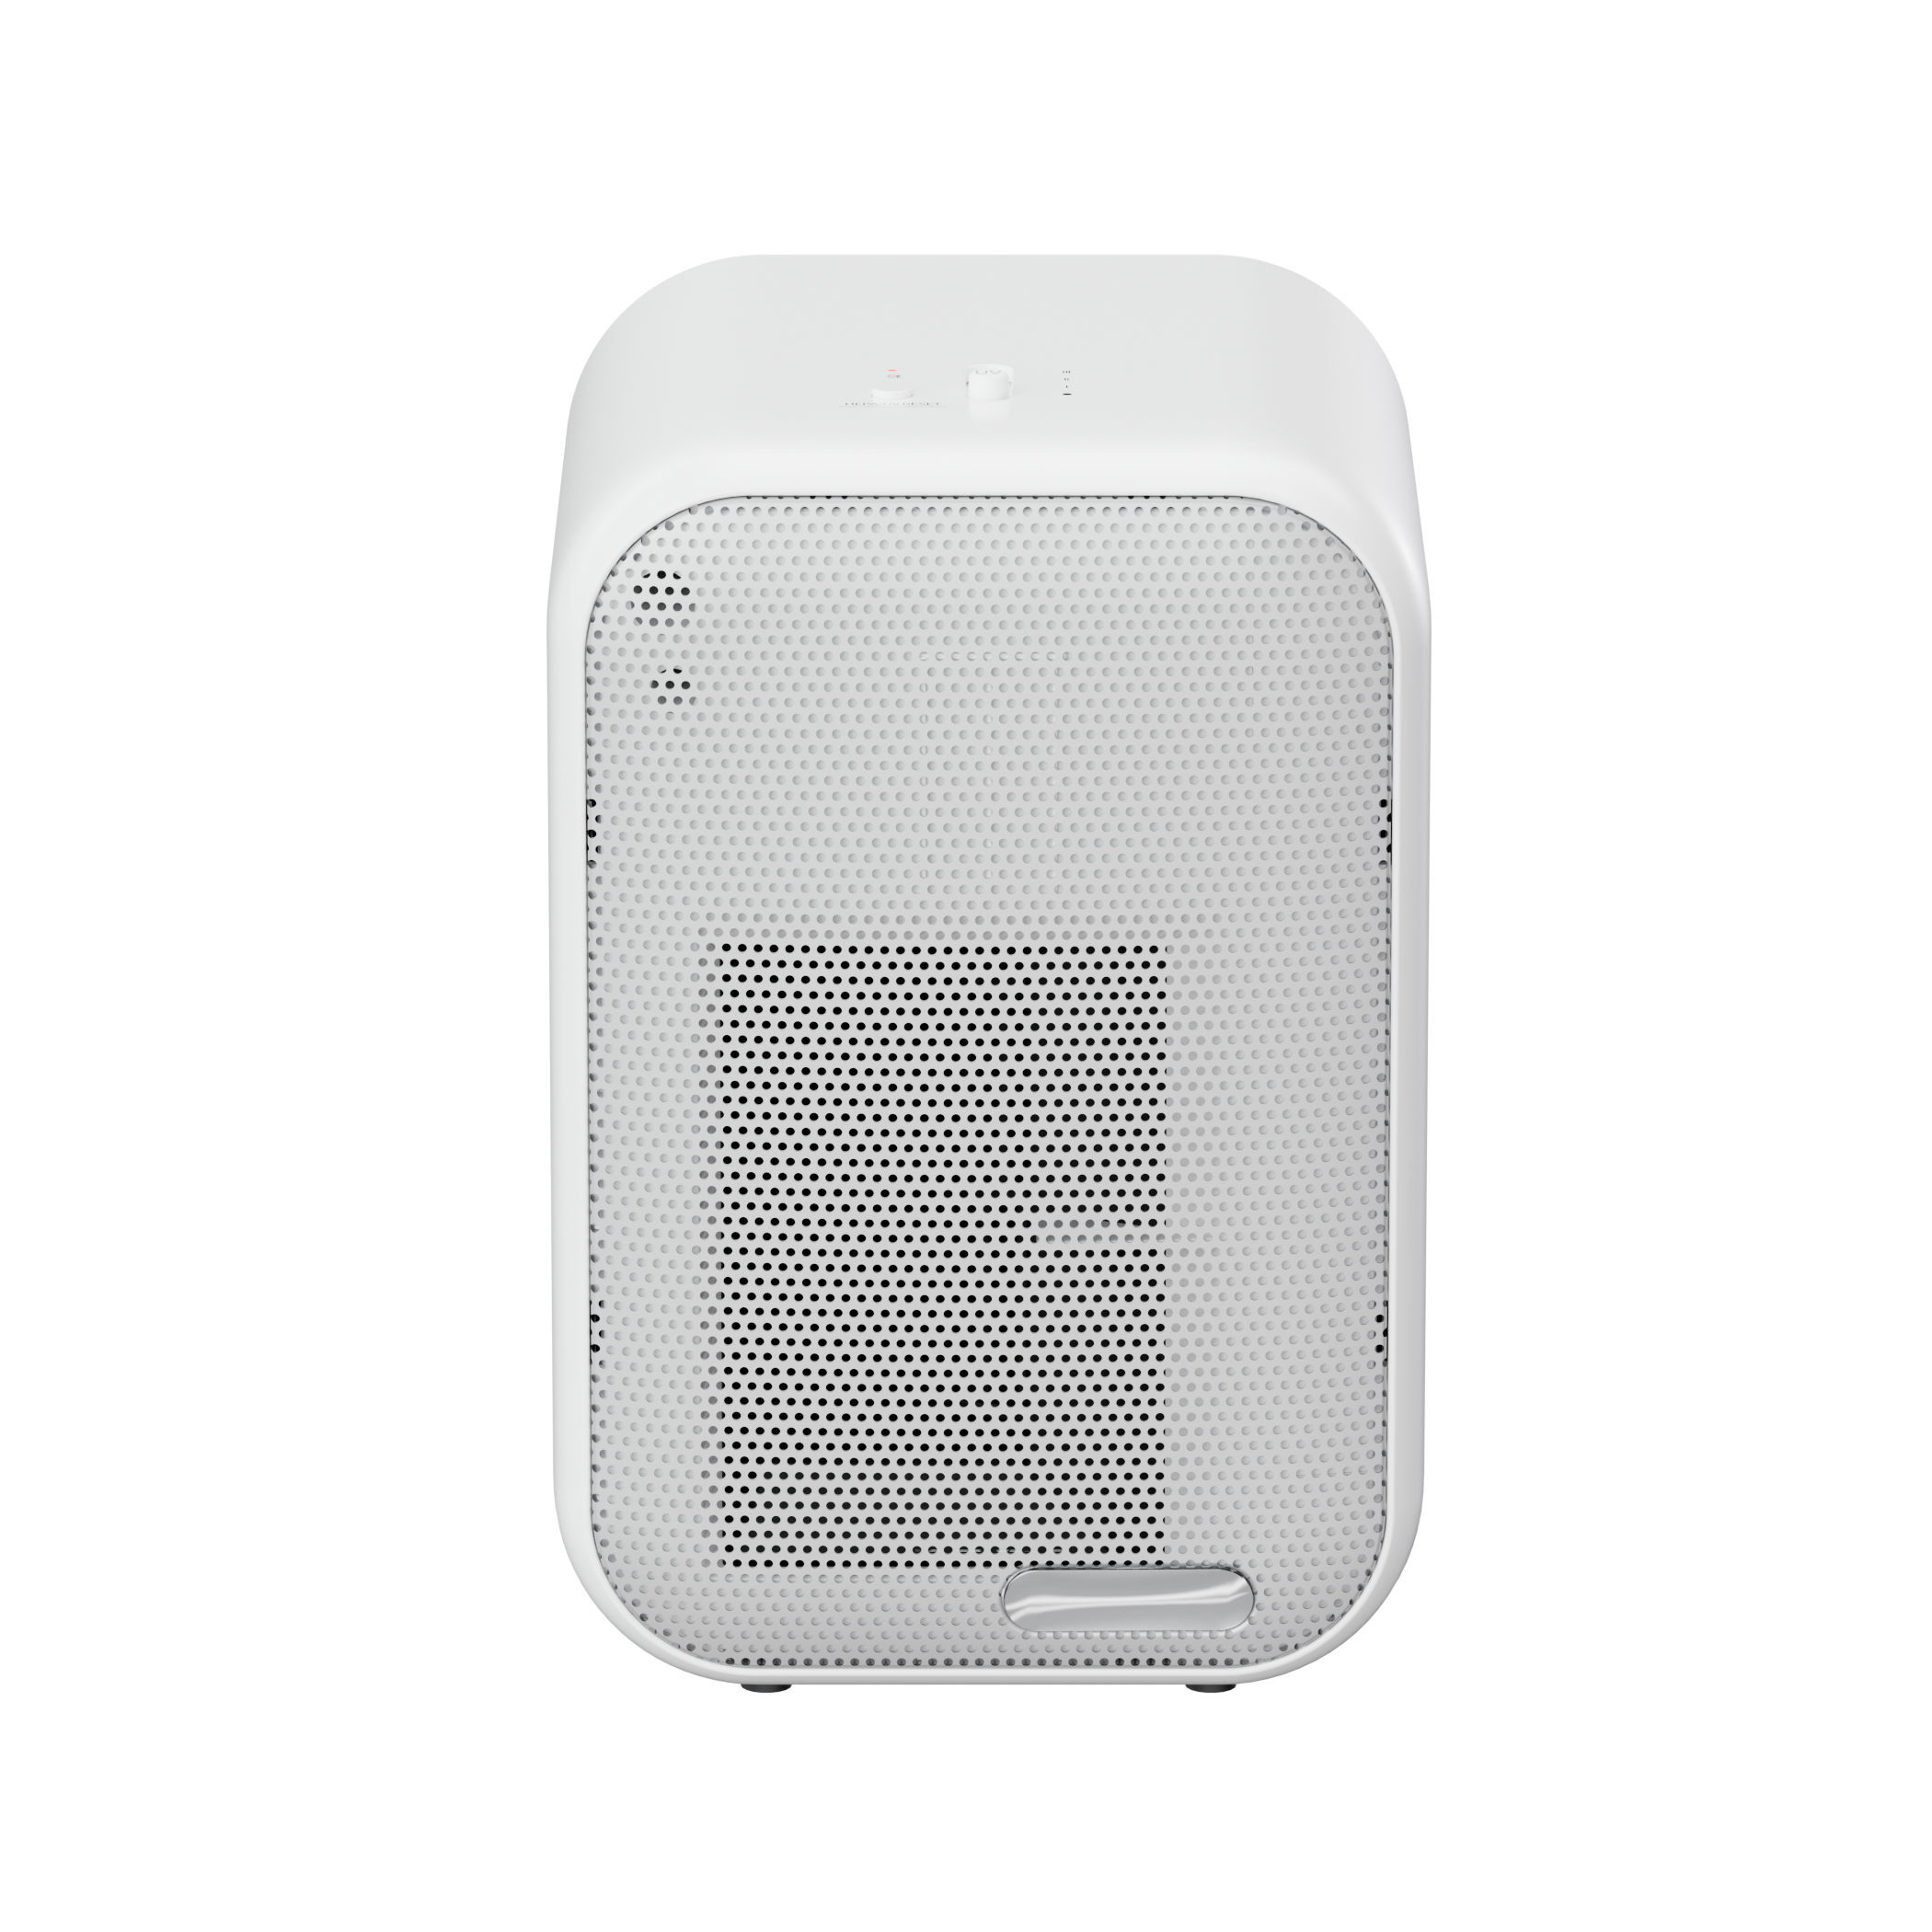 Desktop Air Cleaner Air Purifier with UV Function